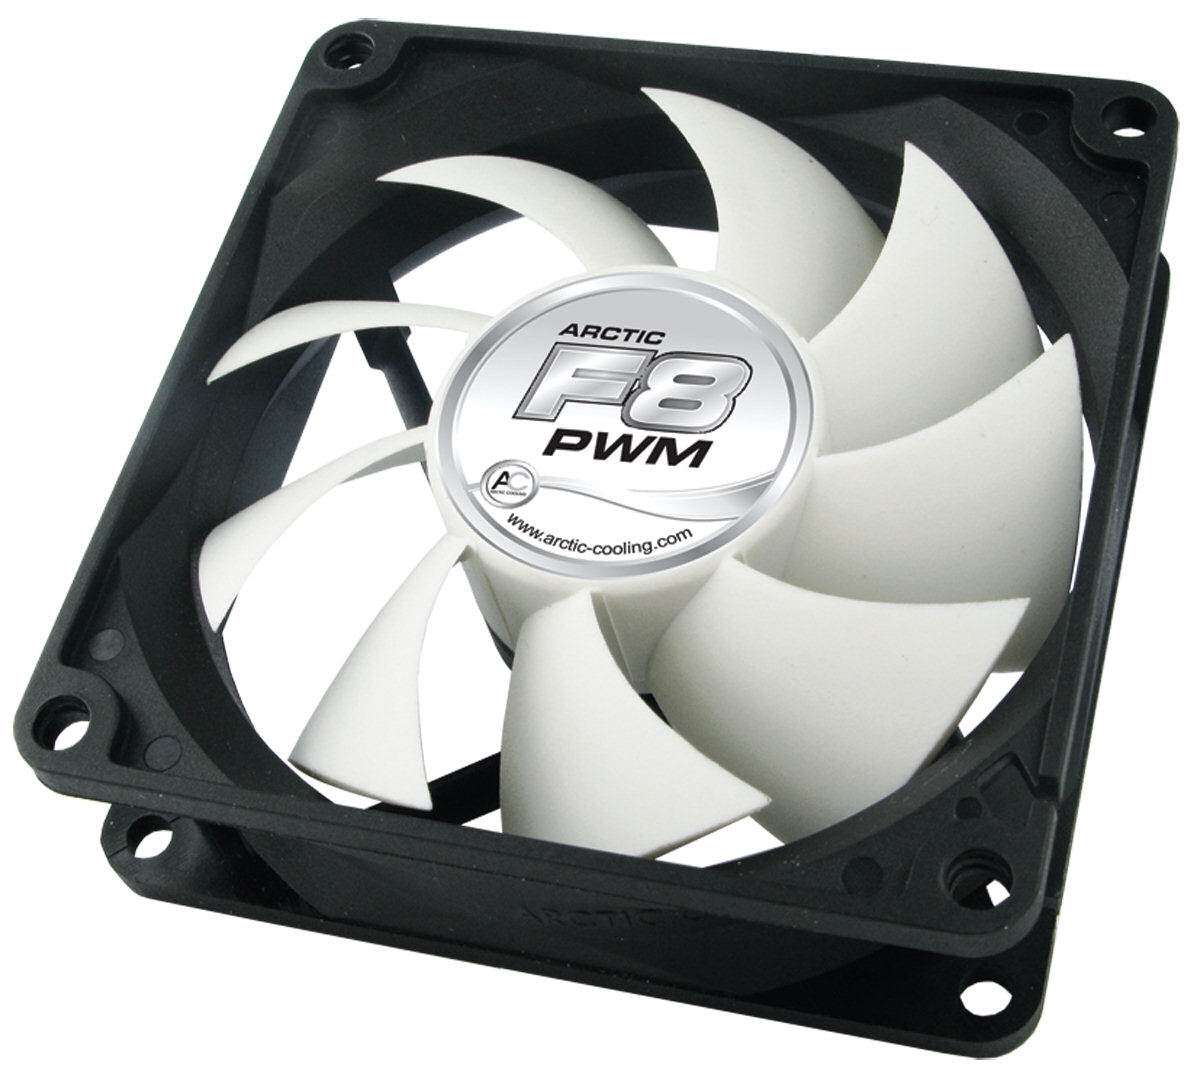 ARCTIC F8 PWM 80 mm PWM Case Fan I Cooler with Standard Case PWM-Signal regulates Fan Speed Push- or Pull Configuration possible 